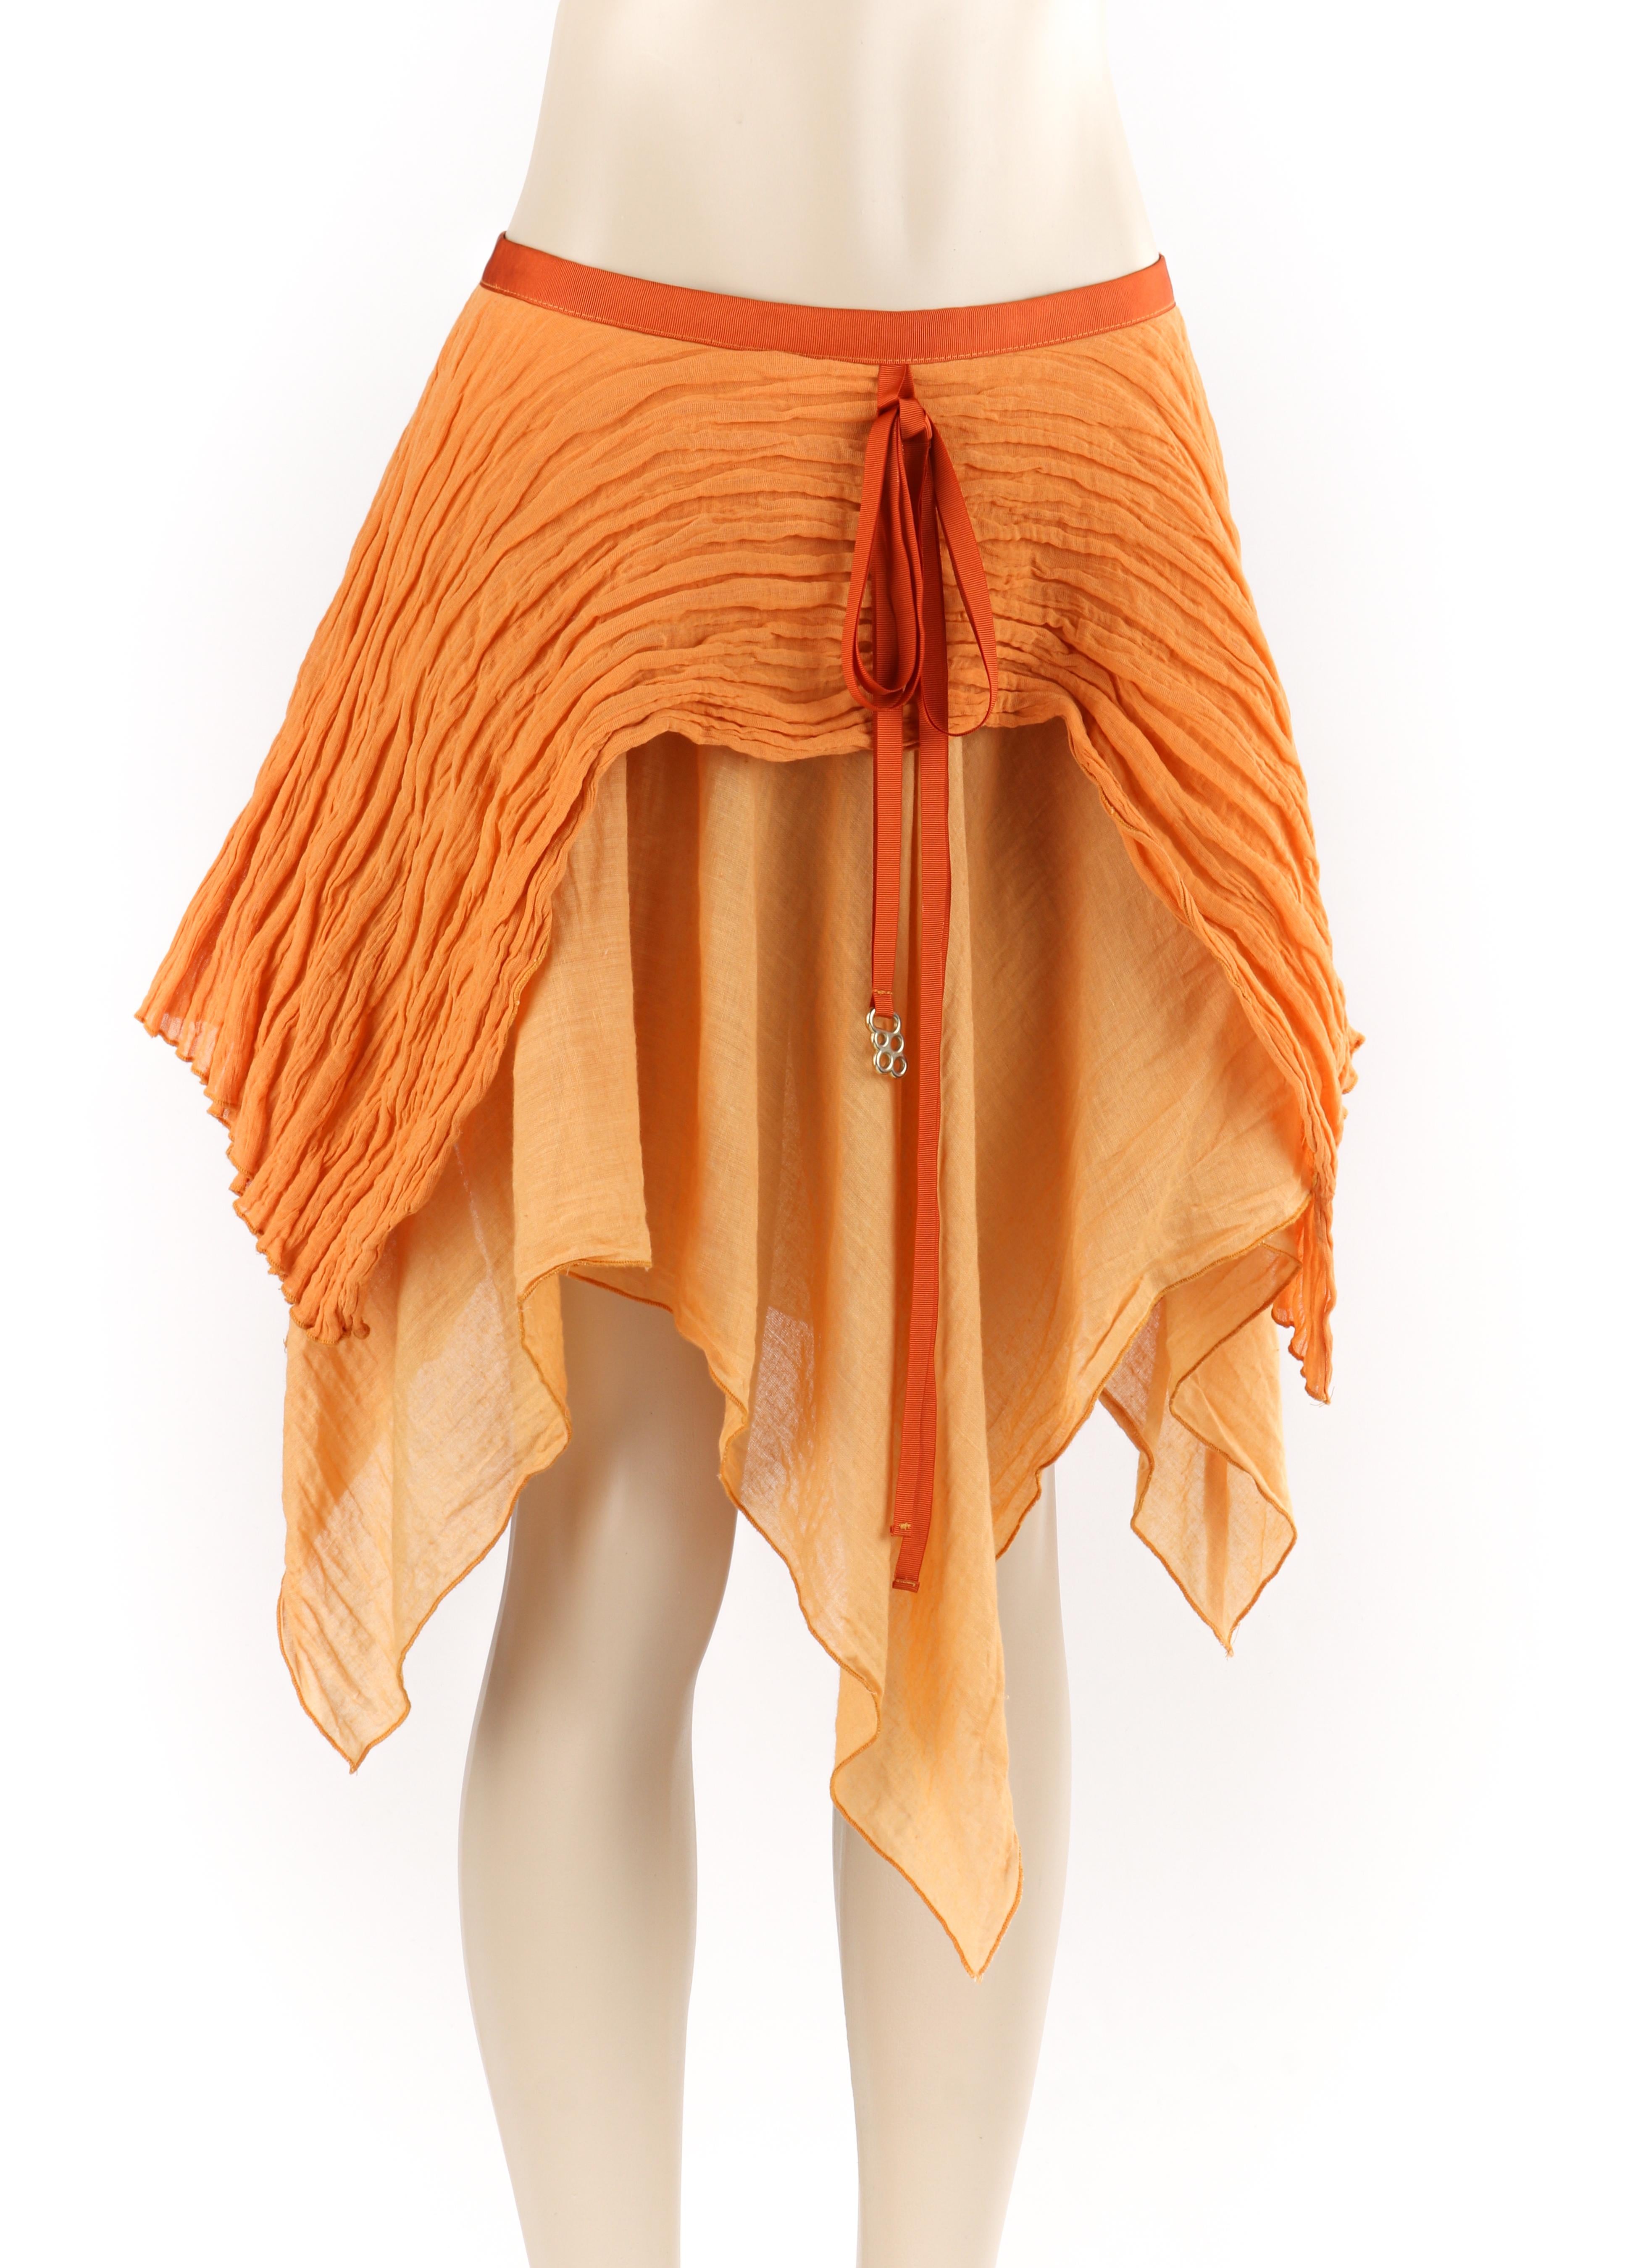 ALEXANDER McQUEEN S/S 1995 Two Toned Orange Layered Asymmetric Ruffled Skirt 
 
Brand / Manufacturer: Alexander McQueen
Collection: S/S 1995 
Style: Skirt
Color(s): Shades of orange
Lined: Yes
Marked Fabric Content: “85% CO (cotton), 15% ME